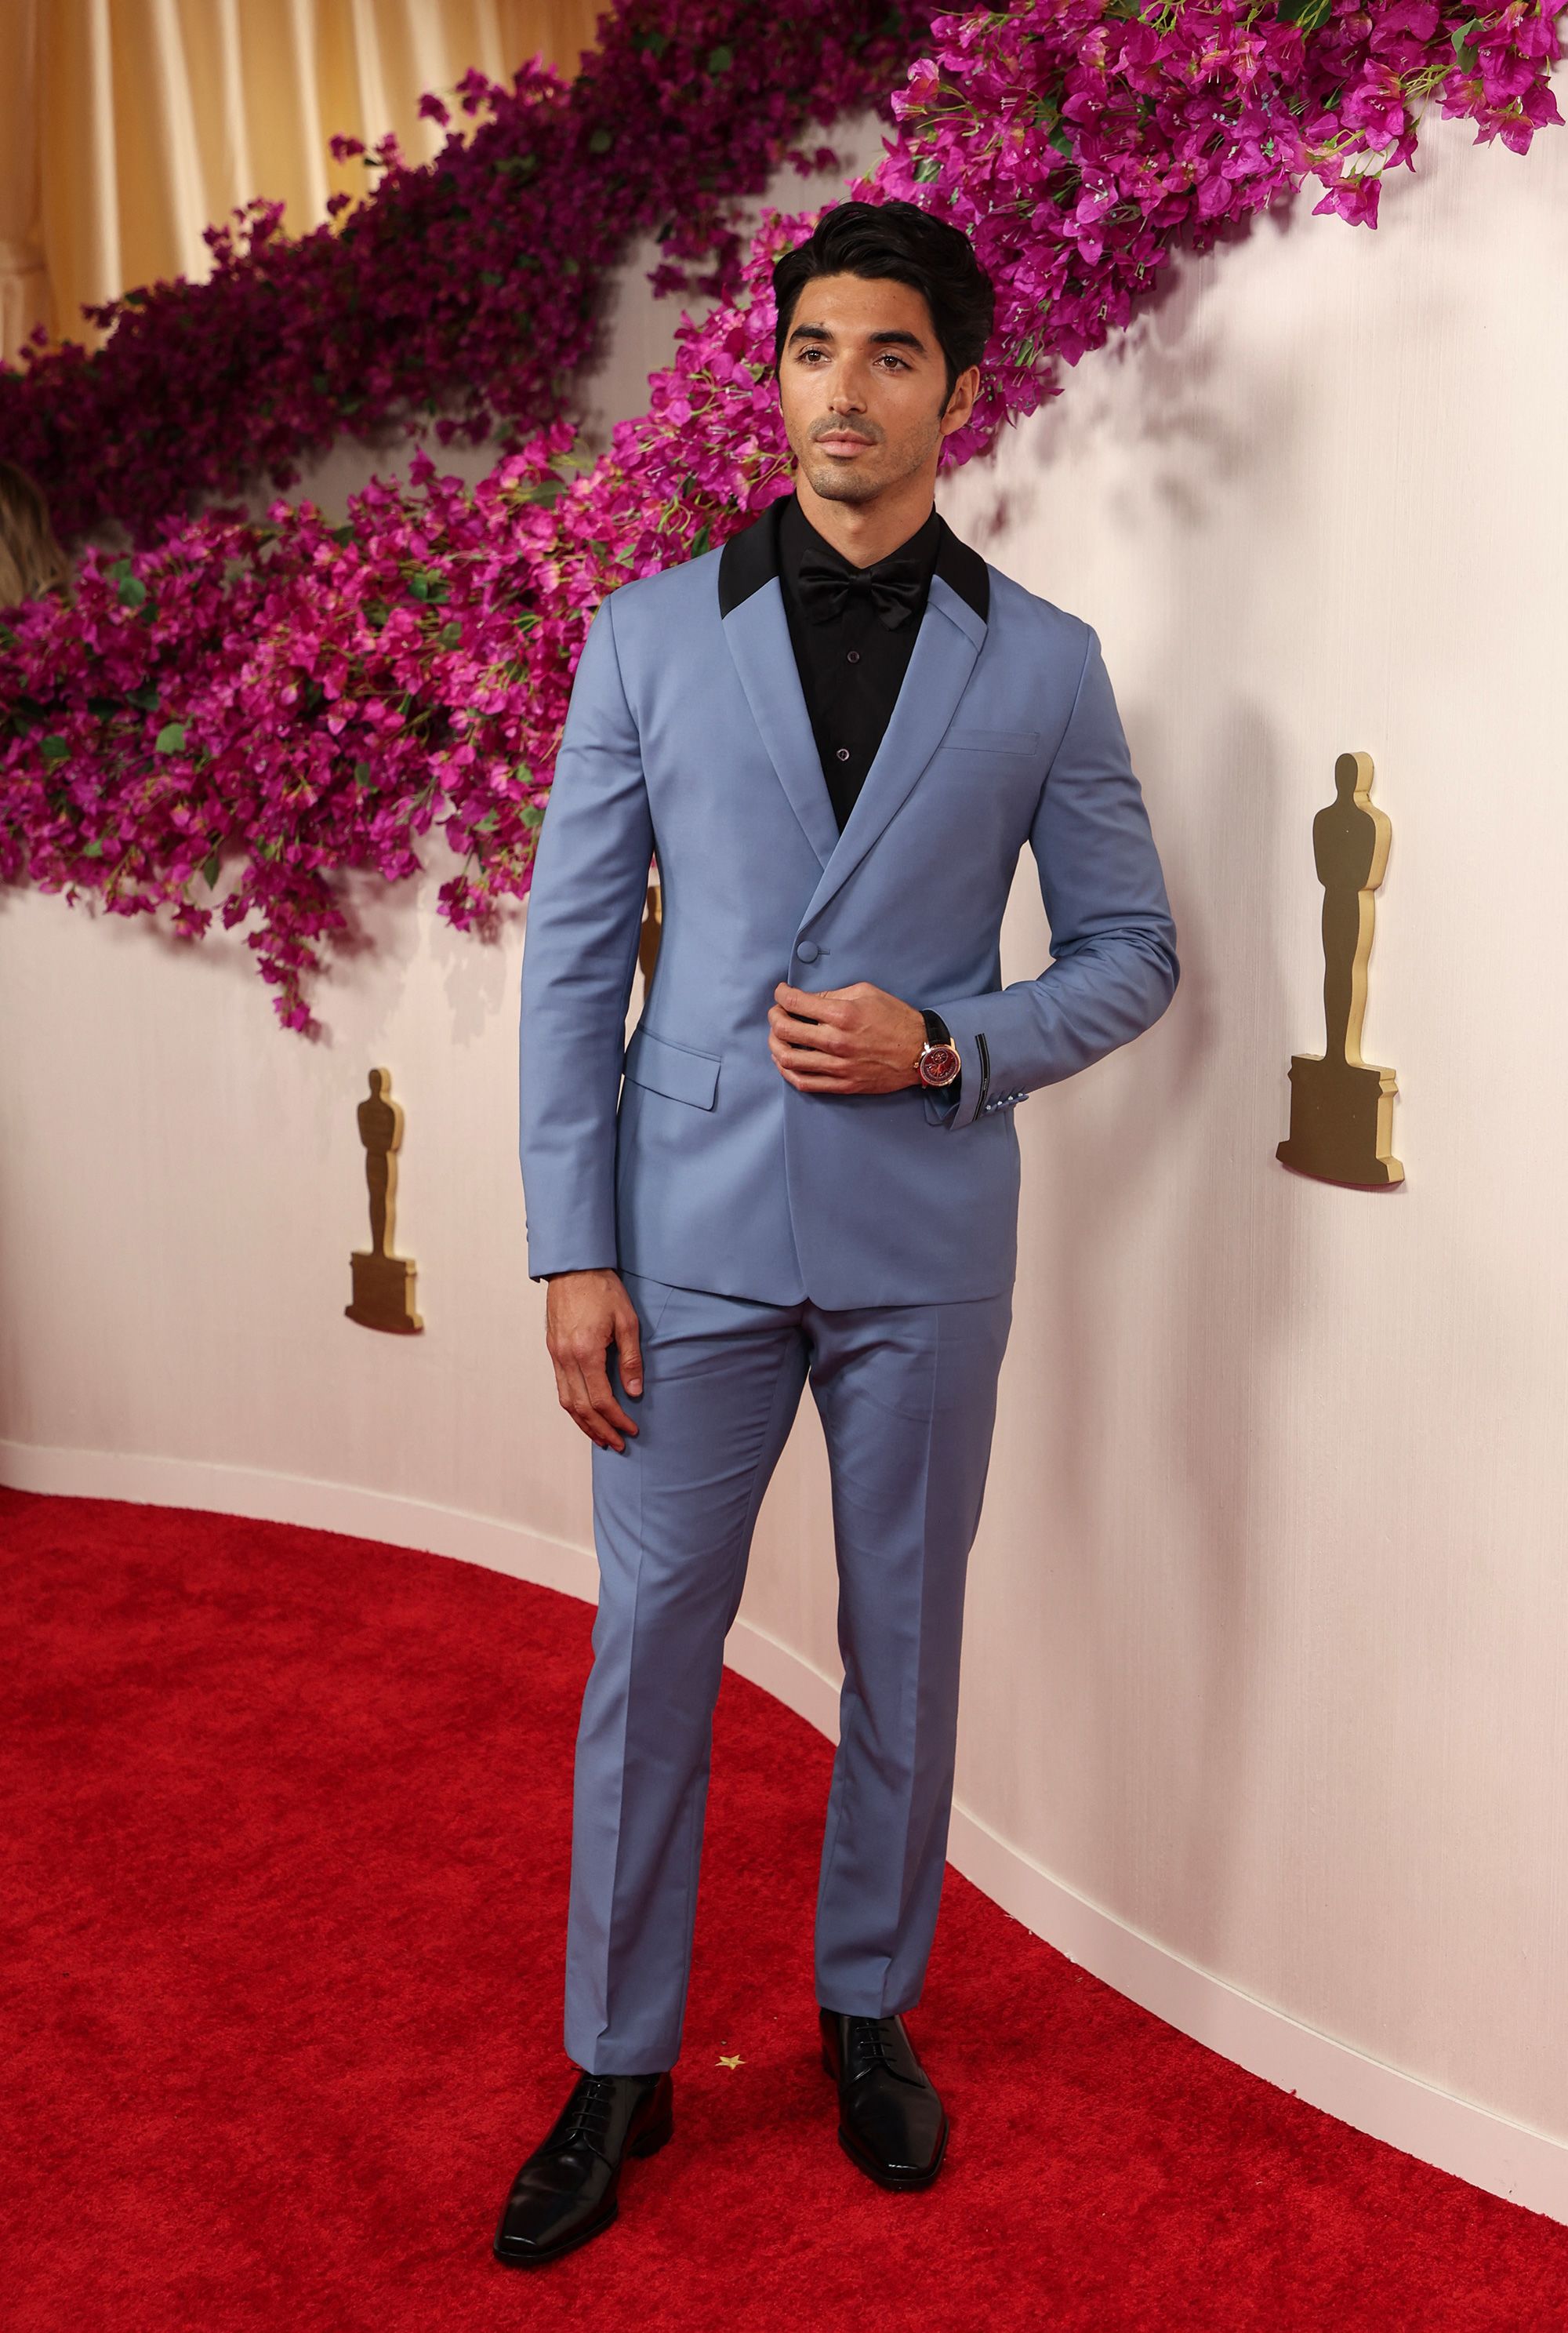 Taylor Zakhar Perez appeared on the red carpet in a blue Prada suit designed by celebrity hairstylist Jason Bolden.  He paired the look with a Vacheron Constantin watch.